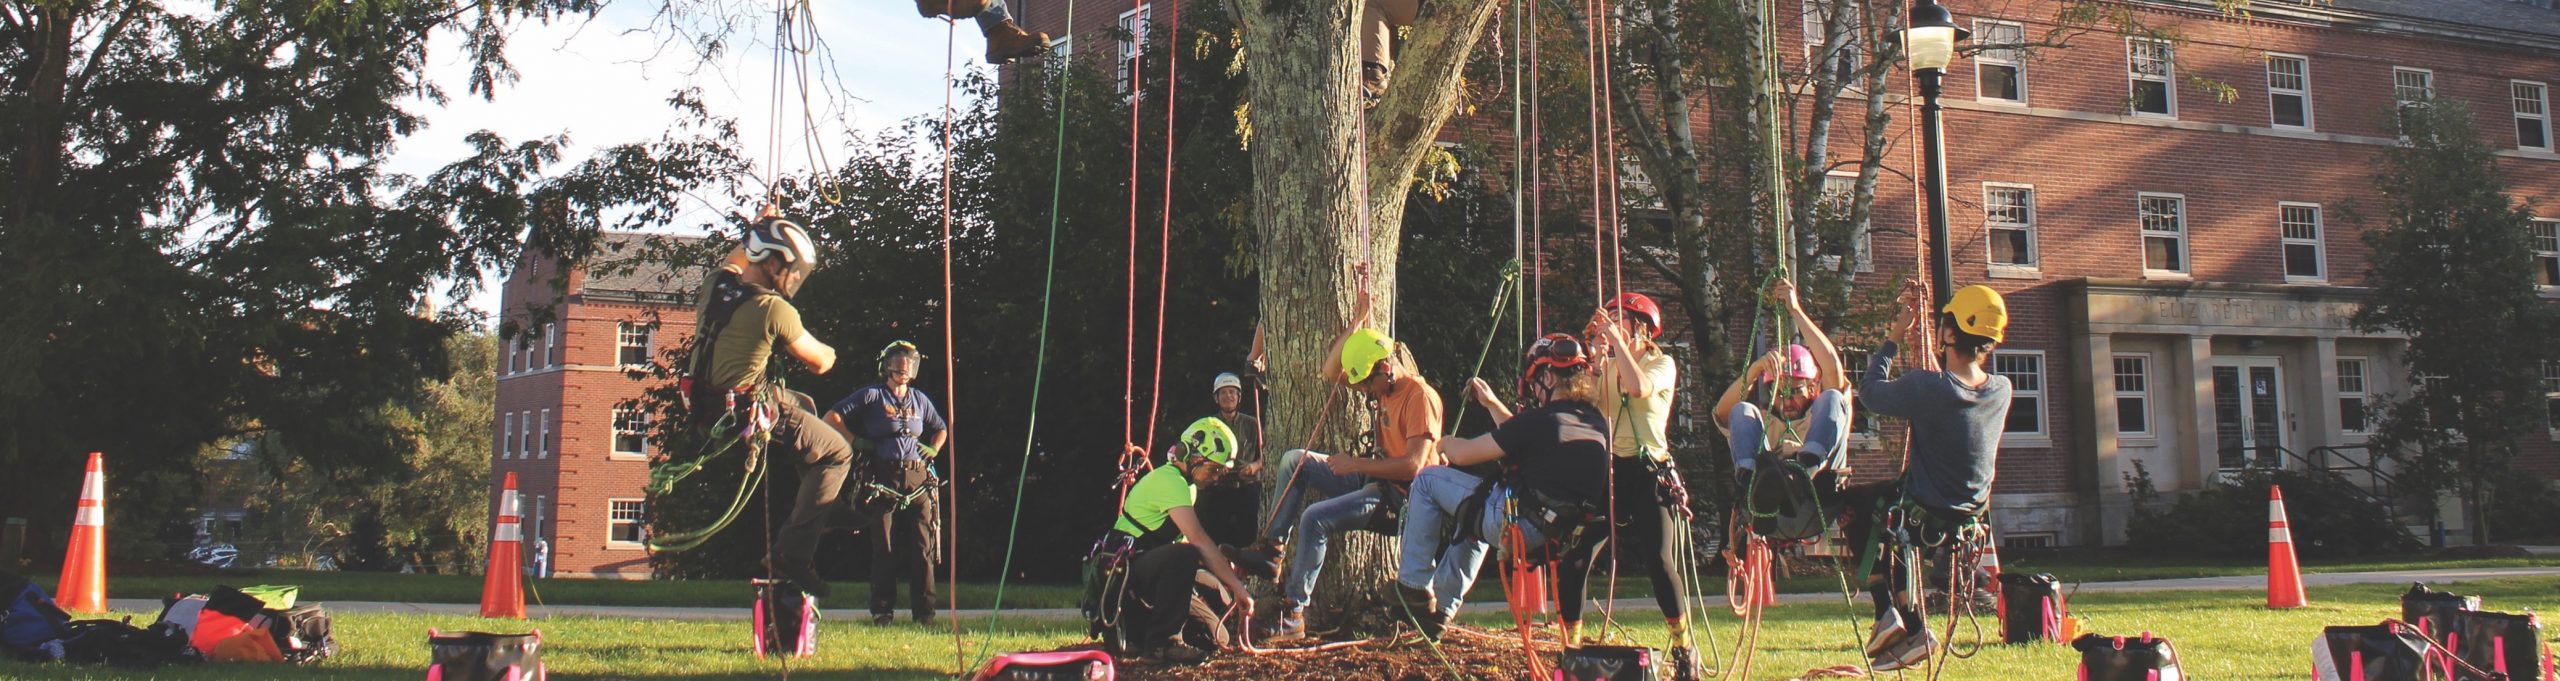 Students learn to use ropes to climb trees as part of the Fundamentals of Arboriculture class taught by James Kehoe of the Department of Natural Resources and the Environment in the College of Agriculture, Health and Natural Resources. Oct. 12, 2021. (Kevin Noonan/UConn Photo)